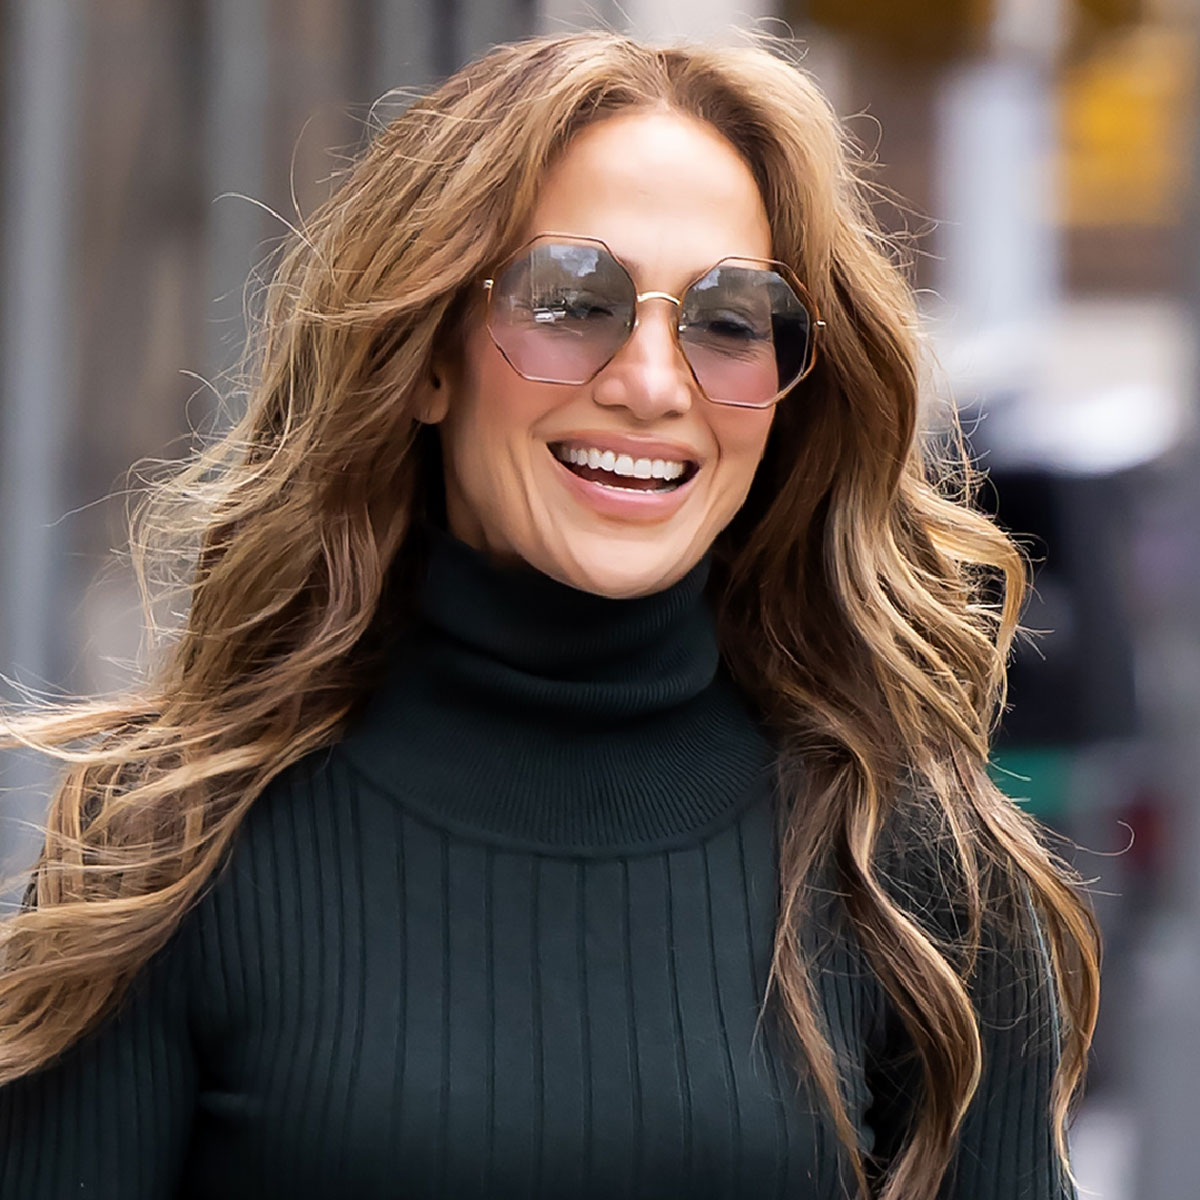 The shoe trend J.Lo is wearing with leggings and anti-skinny jeans